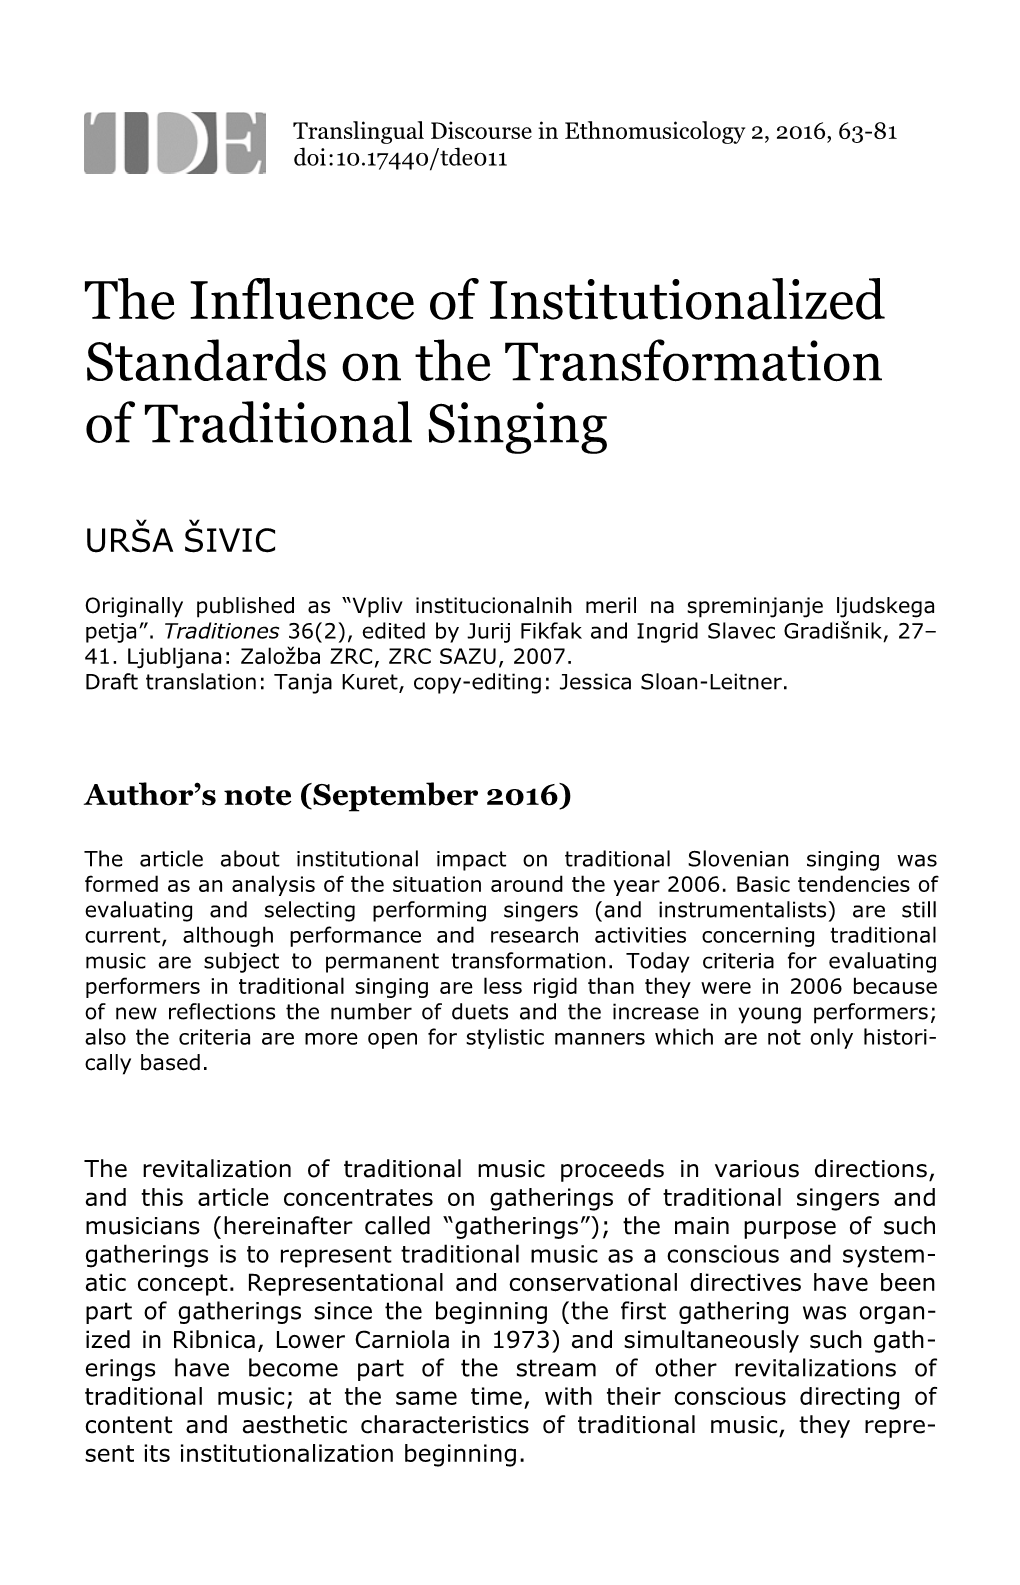 The Influence of Institutionalized Standards on the Transformation of Traditional Singing